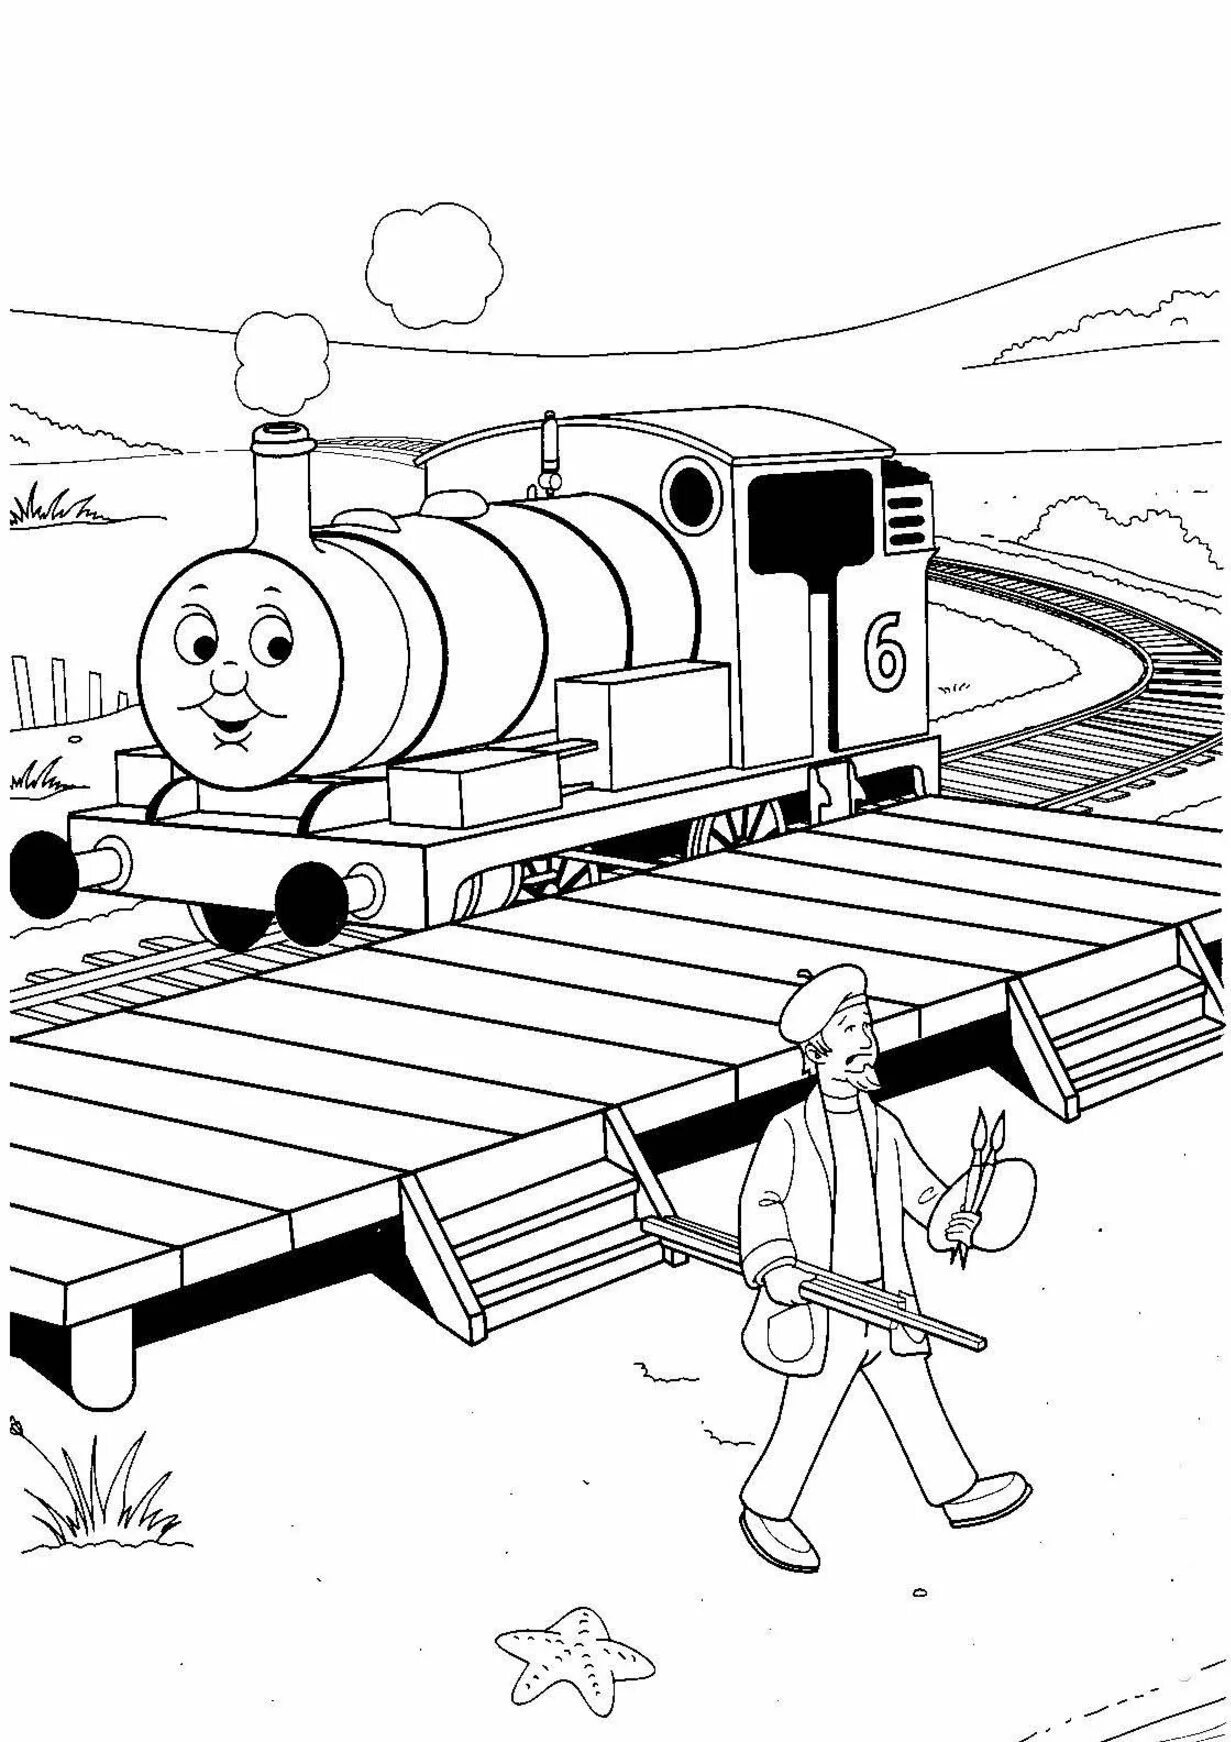 Thomas the Quirky Tank Engine: Scary Coloring Page